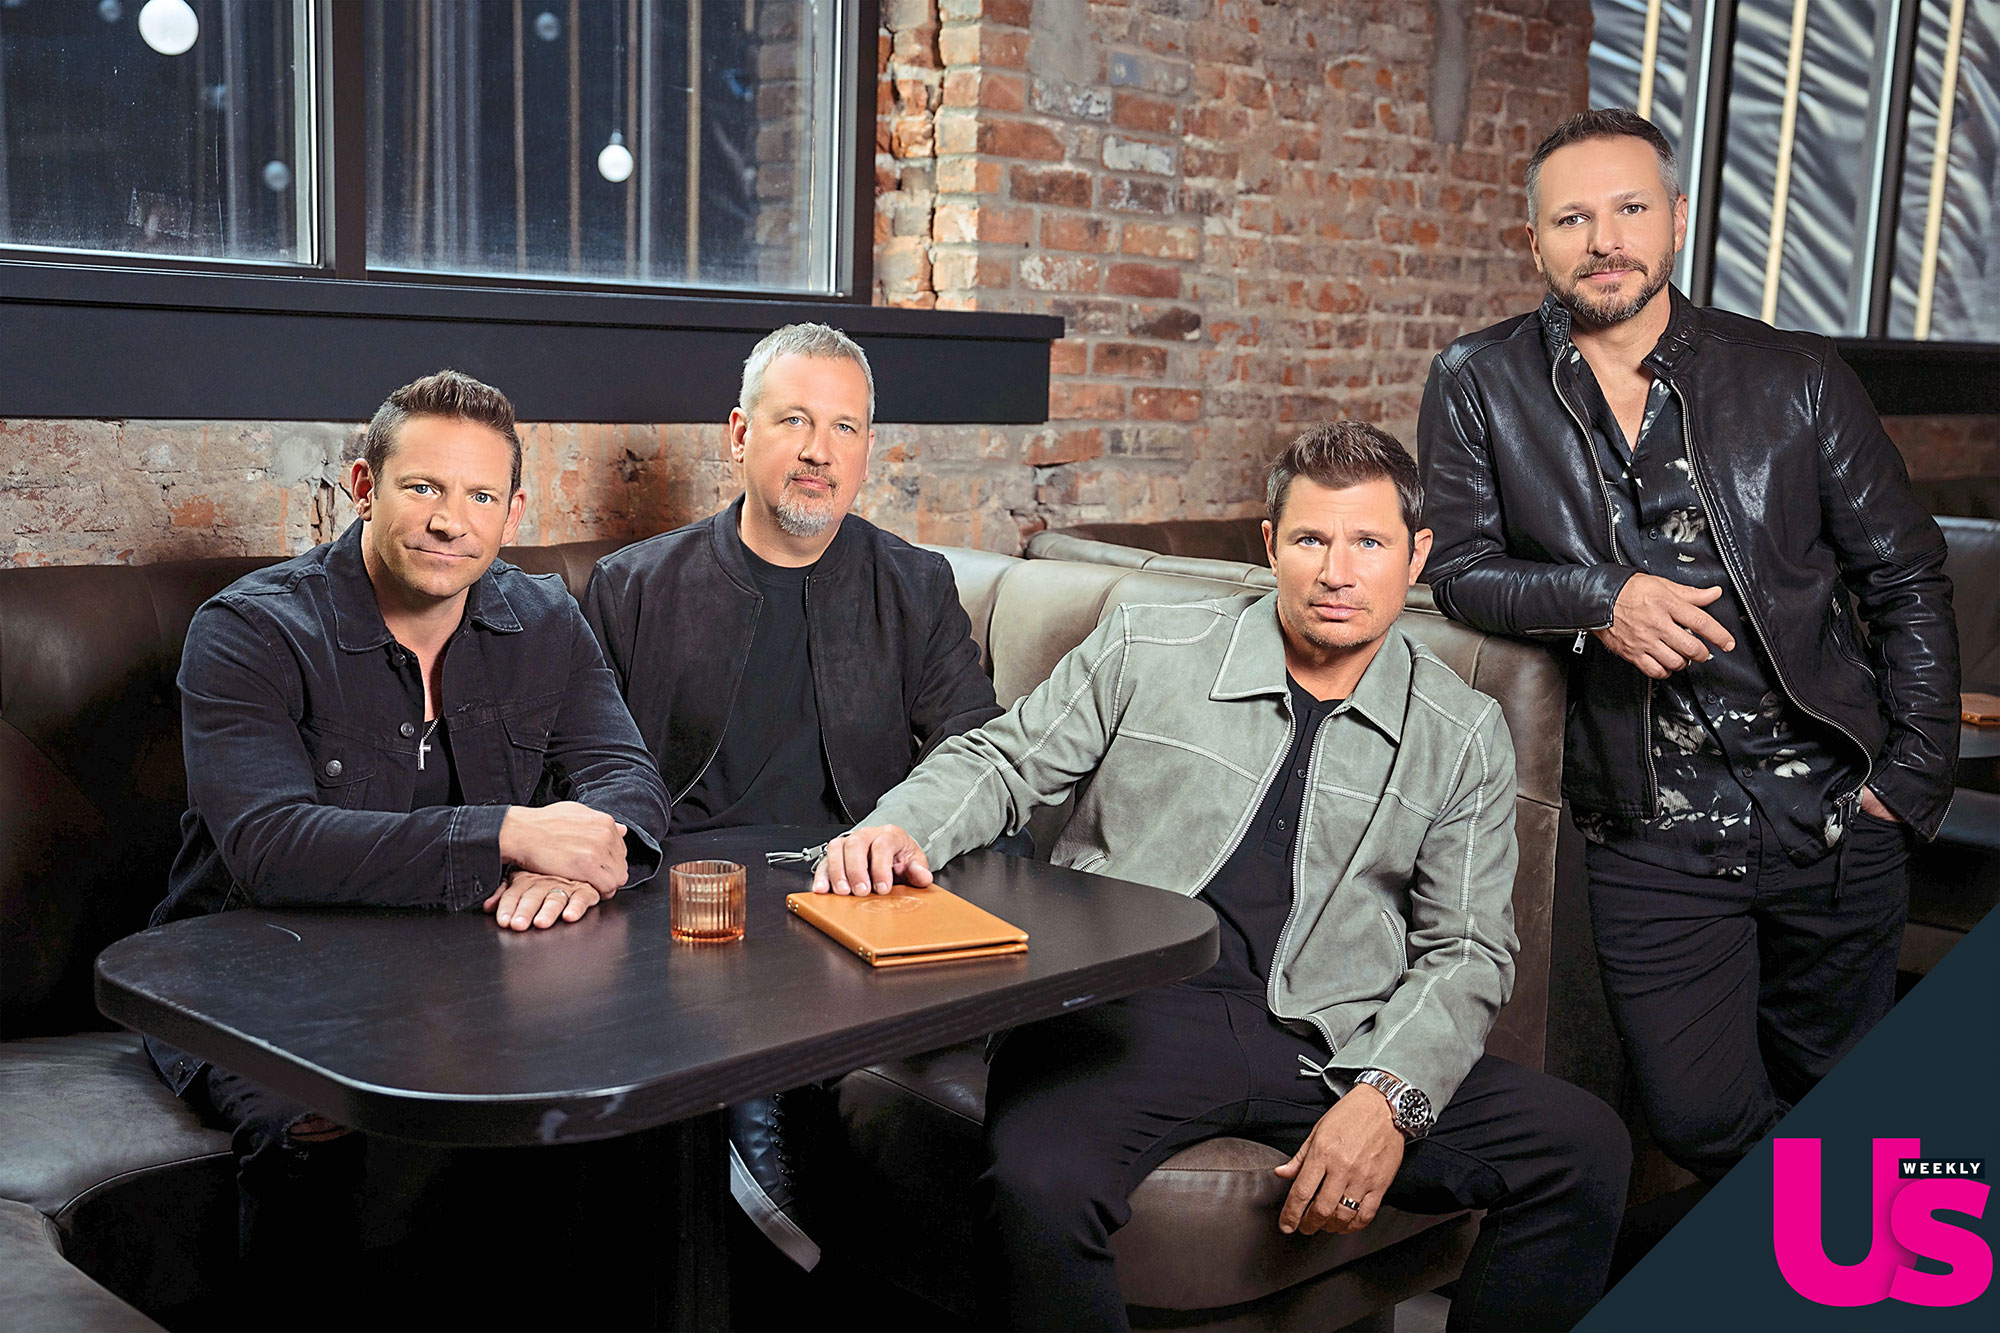 98 Degrees on New Music, Touring, '90s Fashion and Boy Band Mania